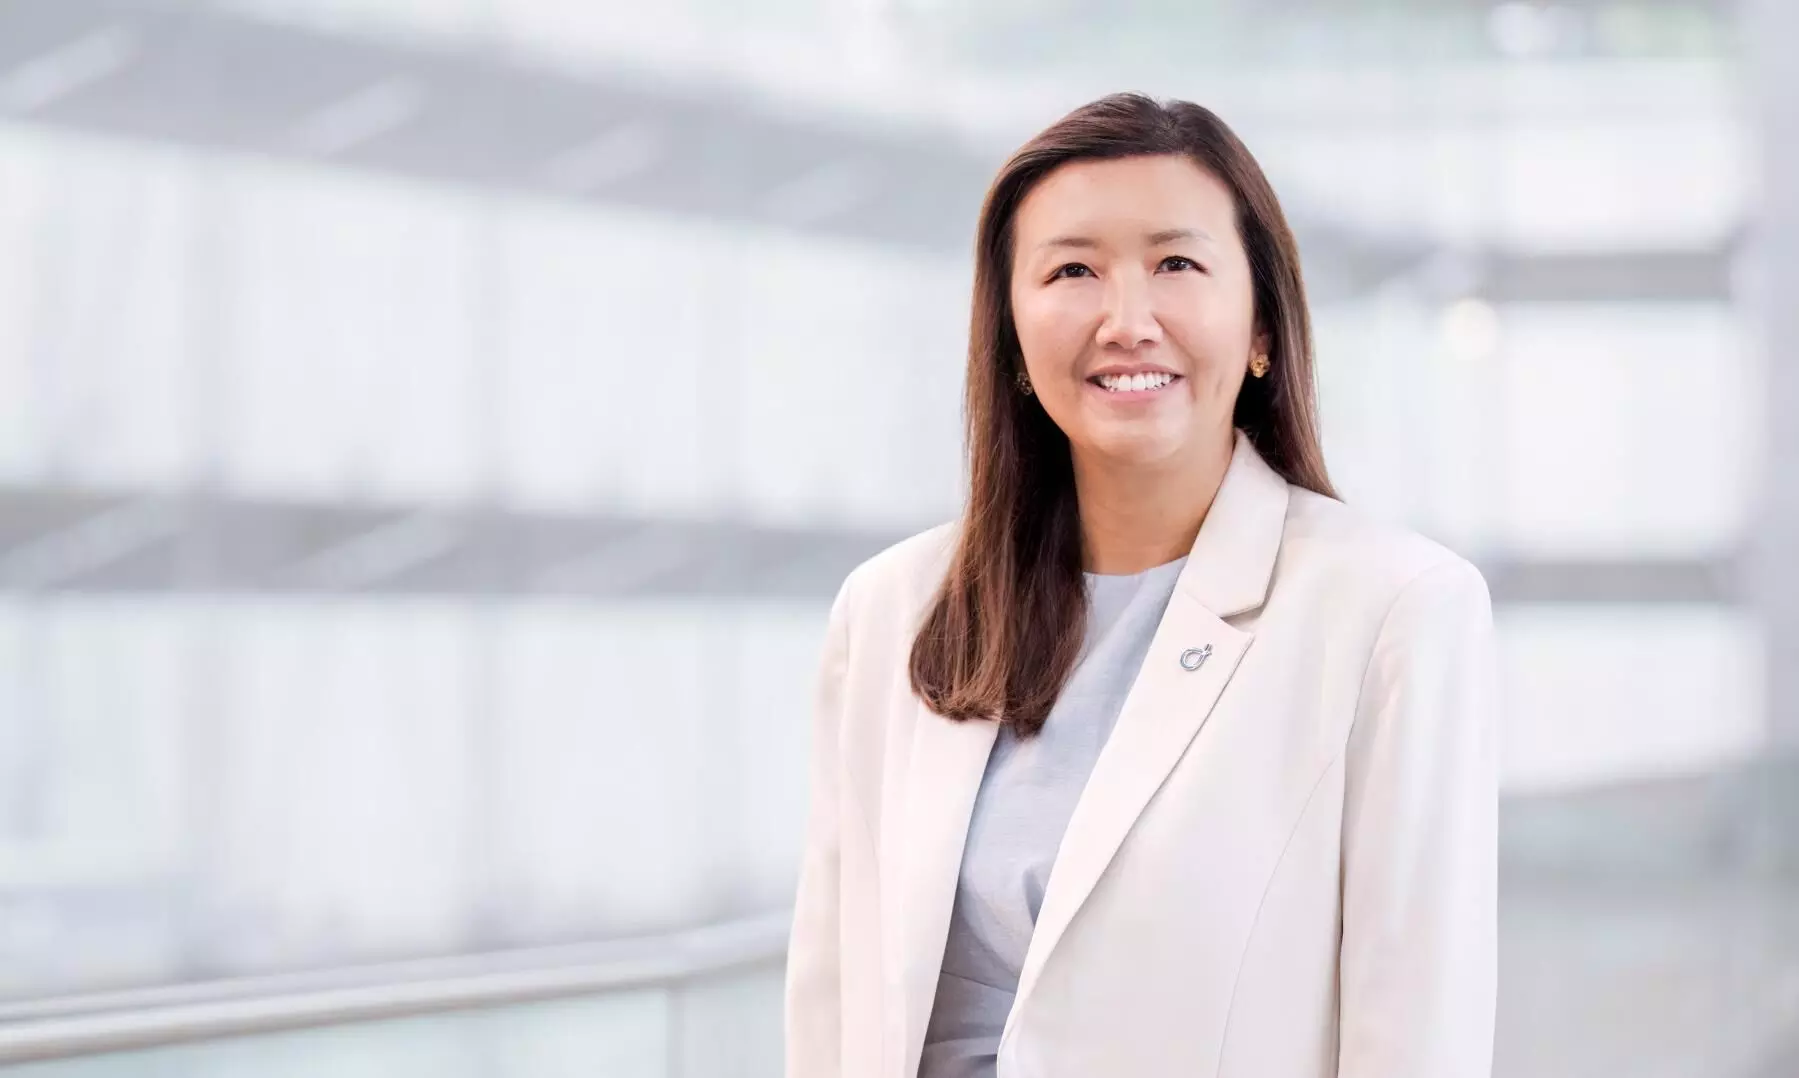 Neo Su Yin becomes Managing Director of dnata in Singapore